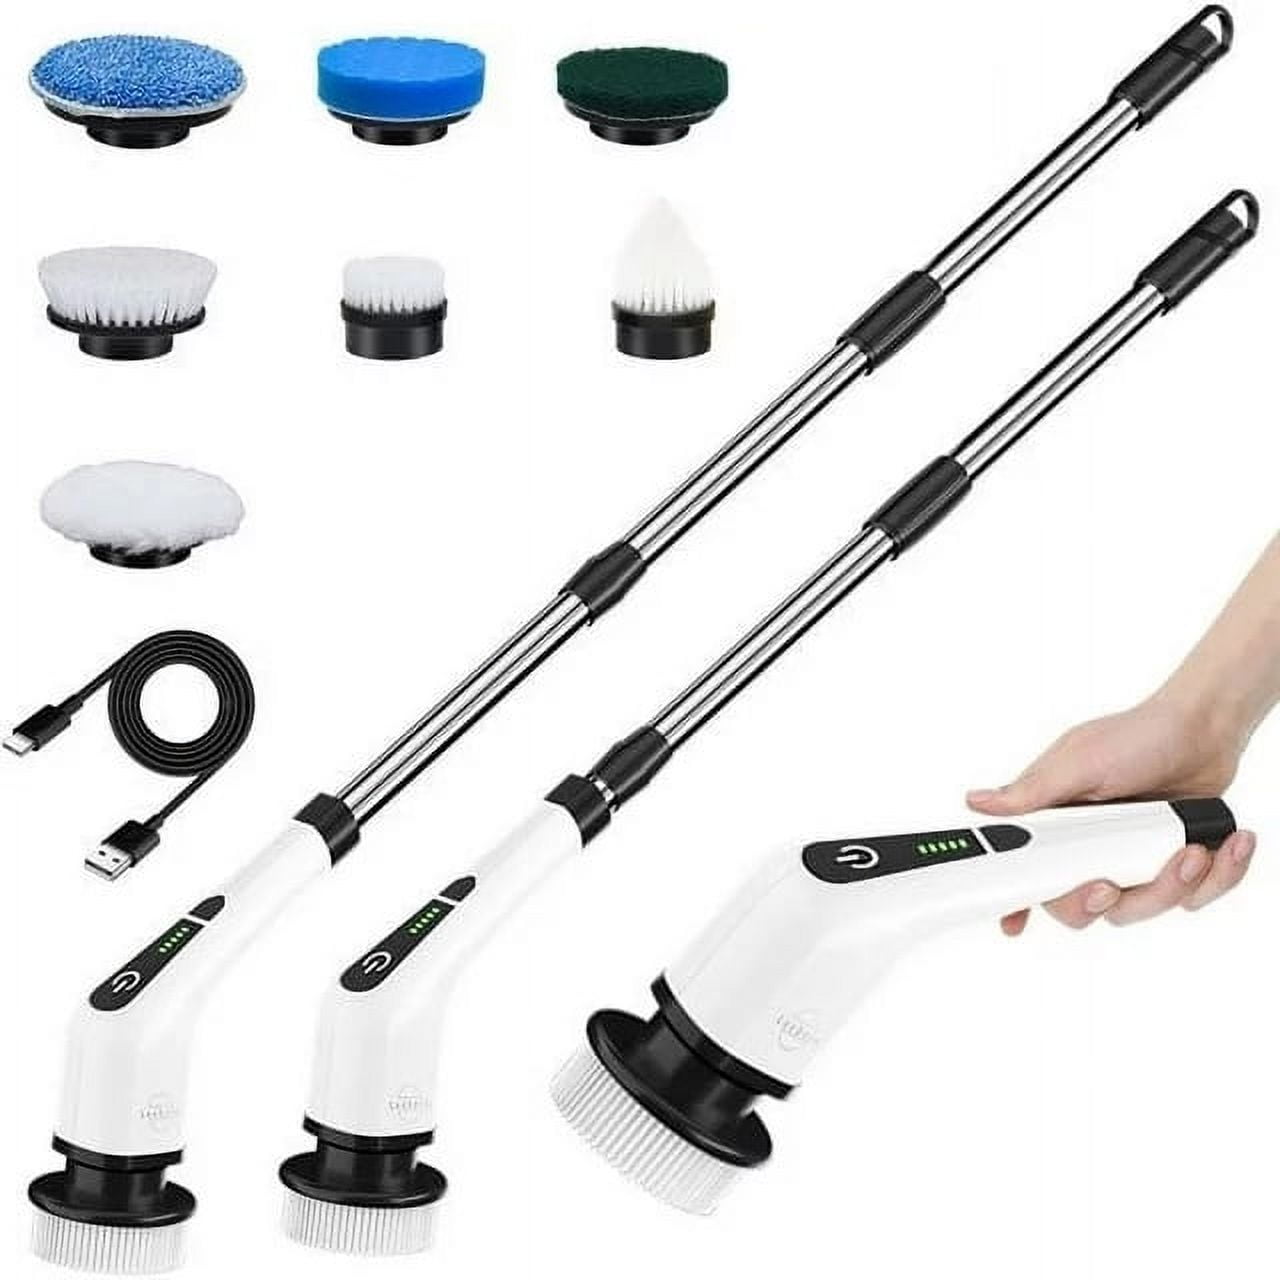 49.99💷 Electric Spin Scrubber, FARI Cordless Cleaning Brush with 7  Replaceable Drill Brush Heads, Tub and Floor Tile 360 Power Scrubber Mop  with Adjustable Handle for Bathroom Kitchen Car (White) for UK